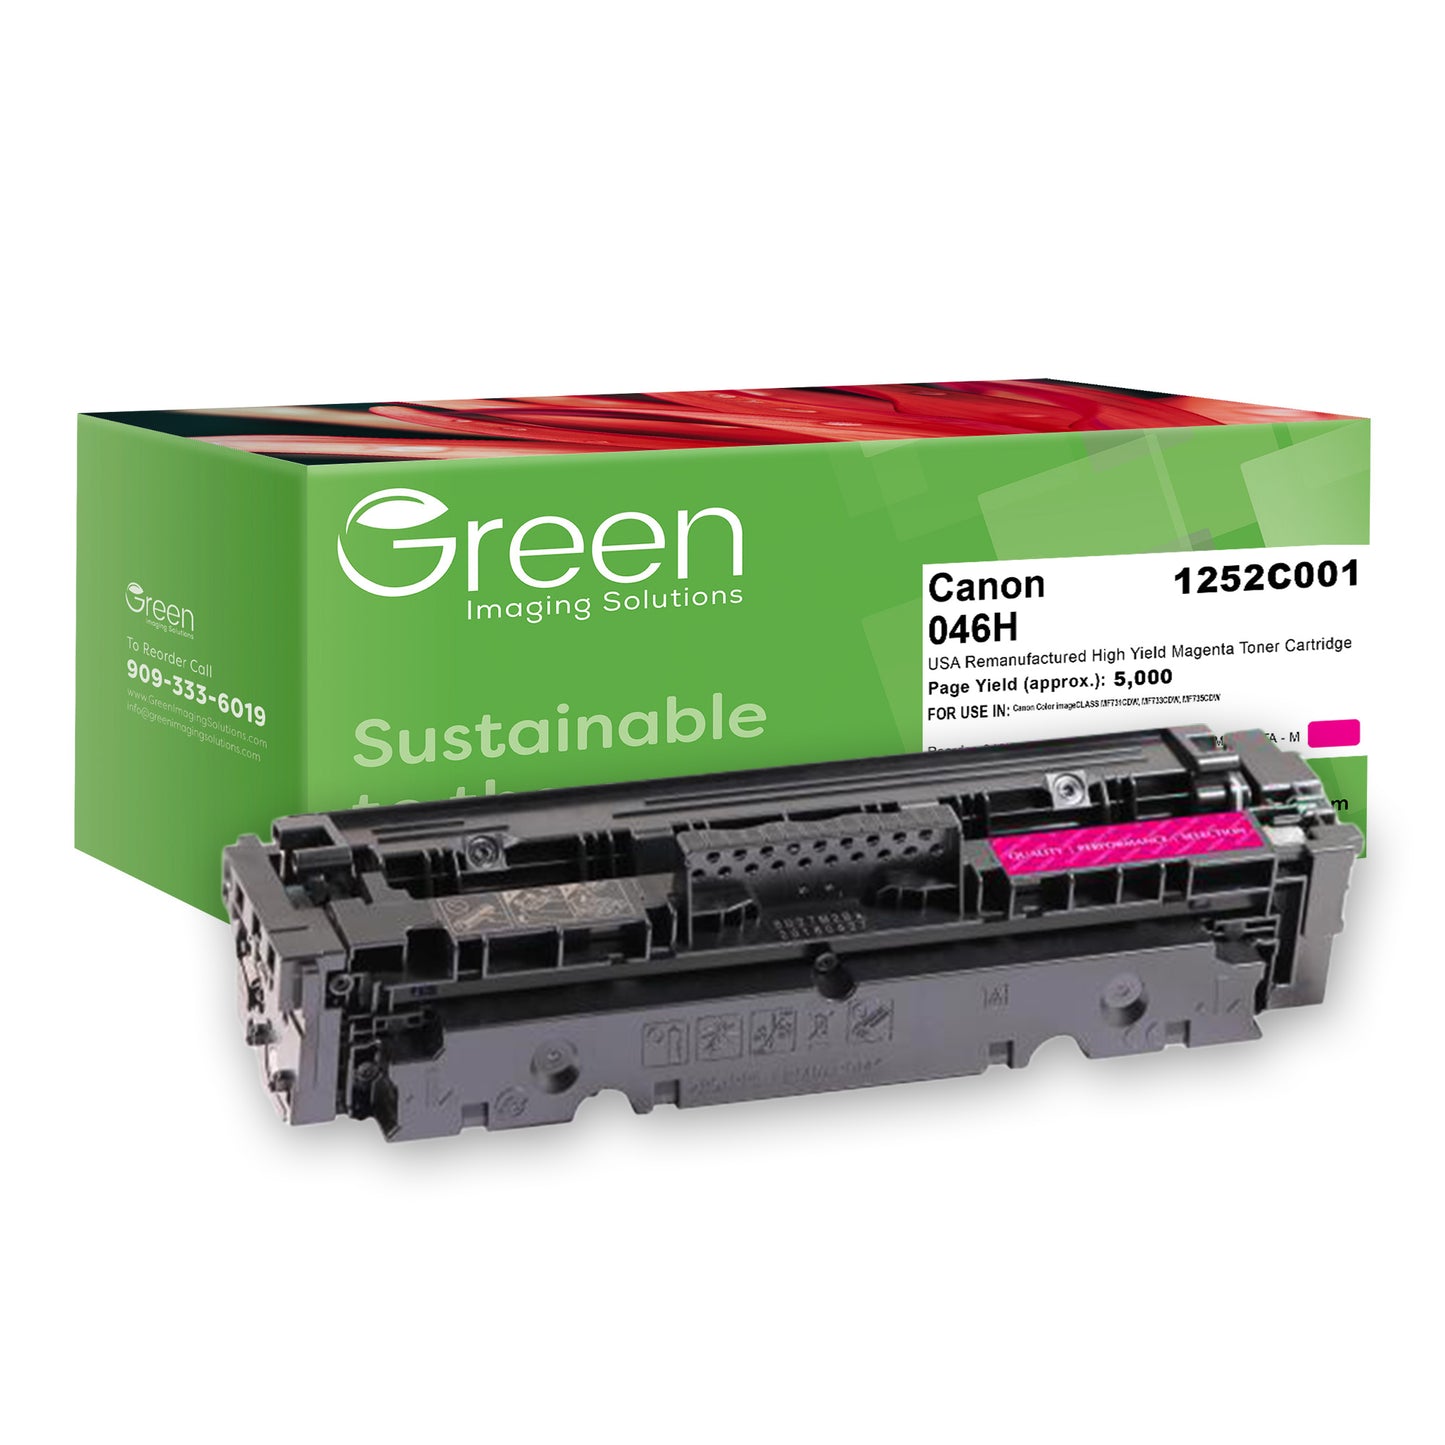 Green Imaging Solutions USA Remanufactured High Yield Magenta Toner Cartridge for Canon 1252C001 (046 H)